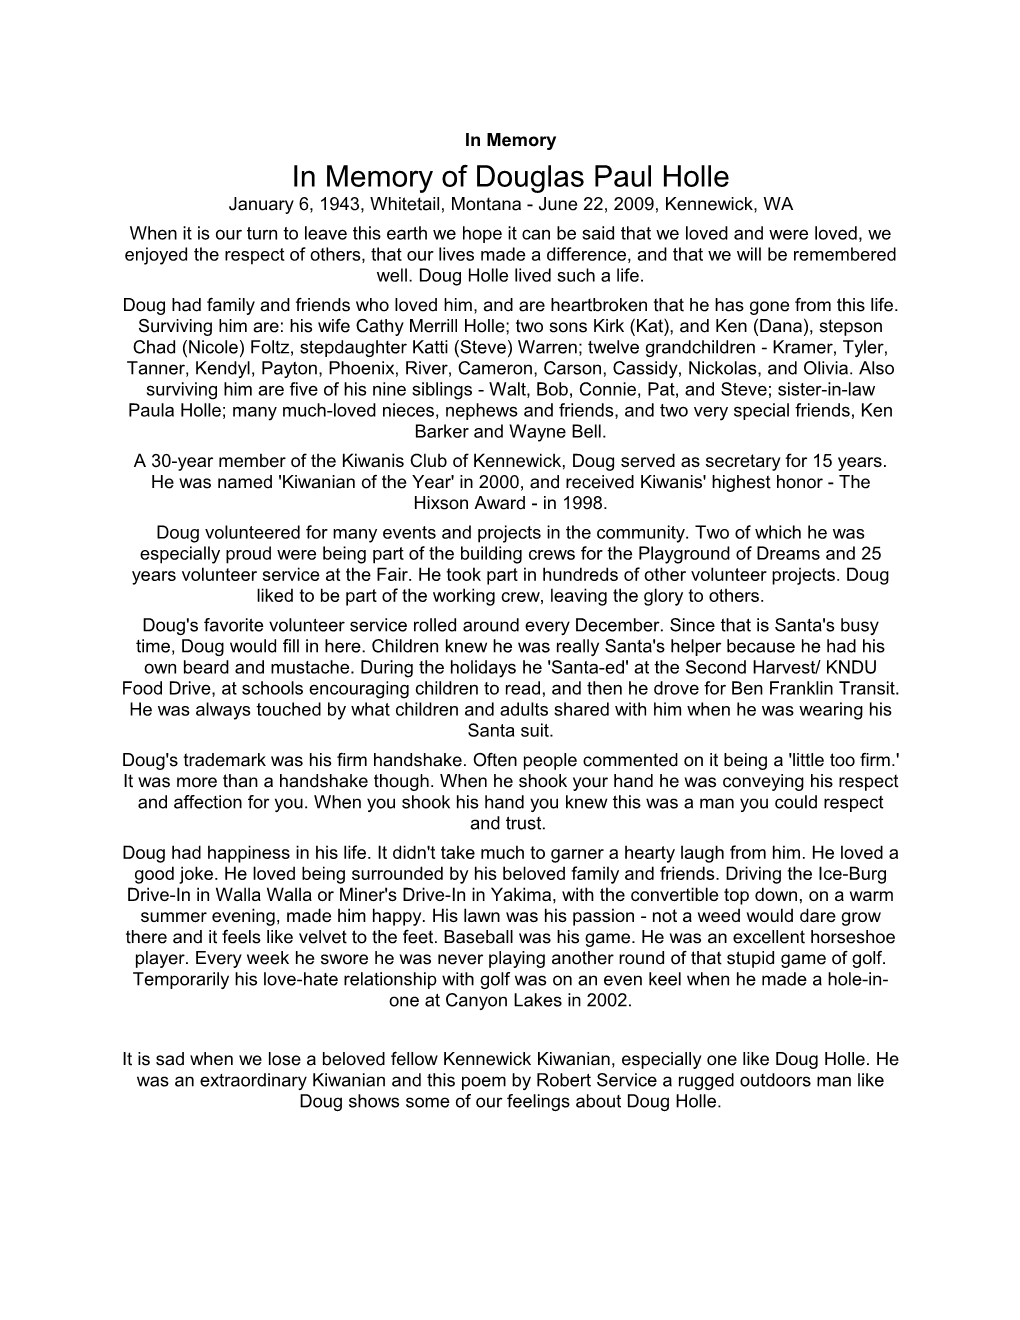 In Memory of Douglas Paul Holle January 6, 1943, Whitetail, Montana - June 22, 2009, Kennewick